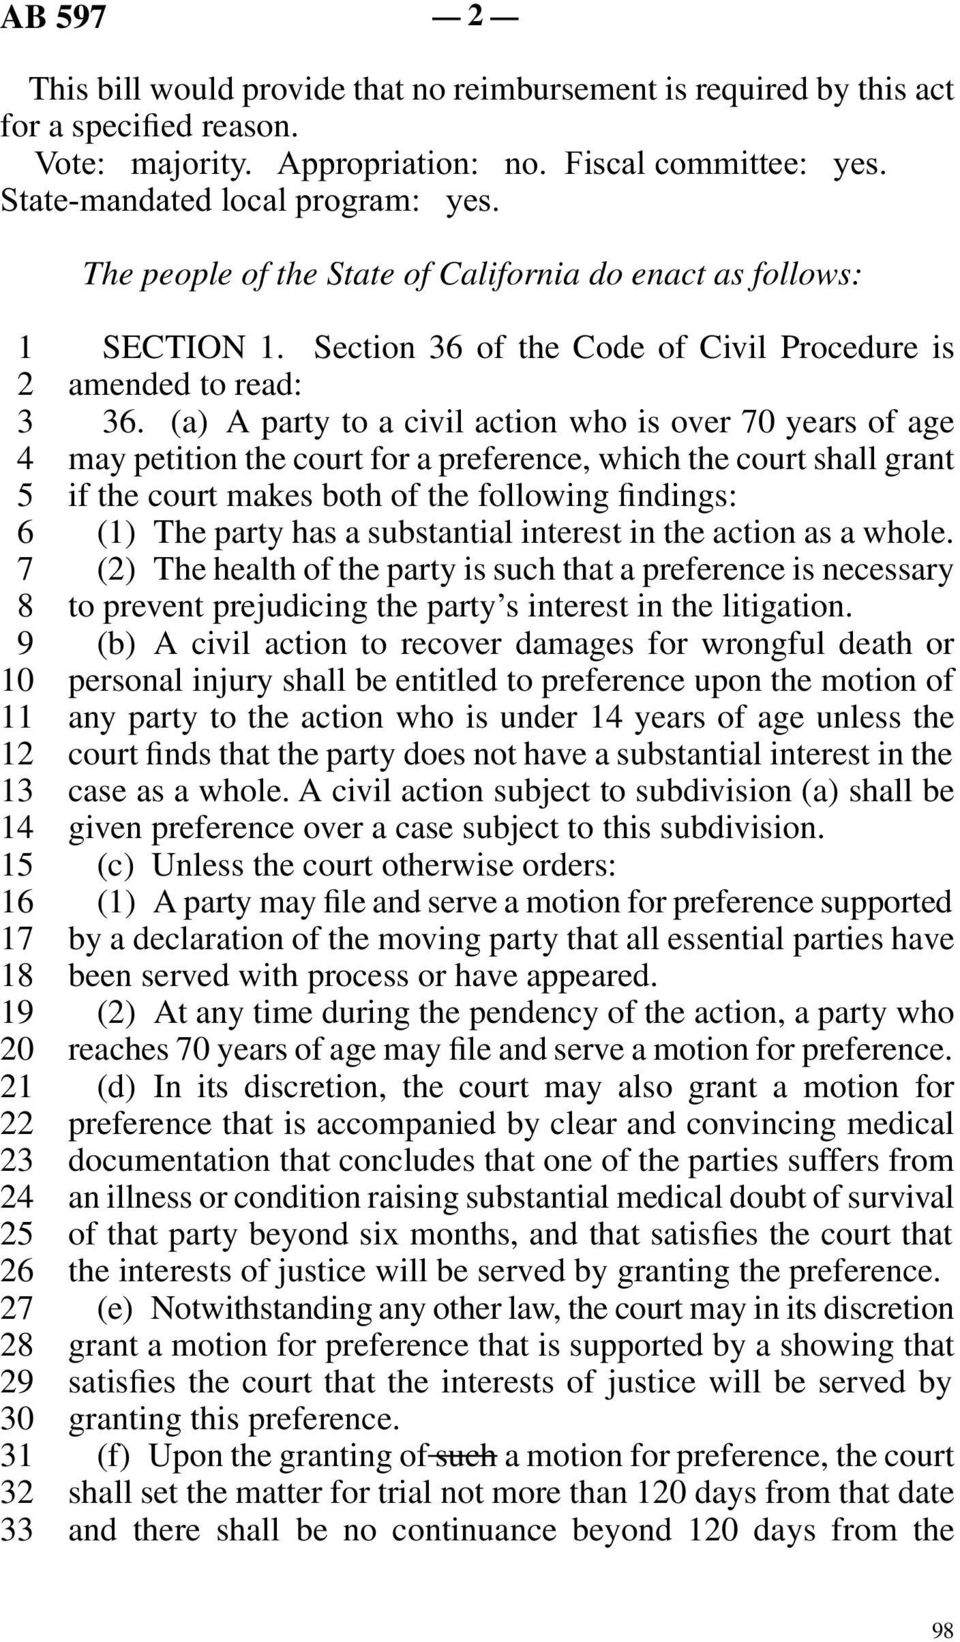 (a) A party to a civil action who is over 70 years of age line 4 may petition the court for a preference, which the court shall grant line 5 if the court makes both of the following findings: line 6